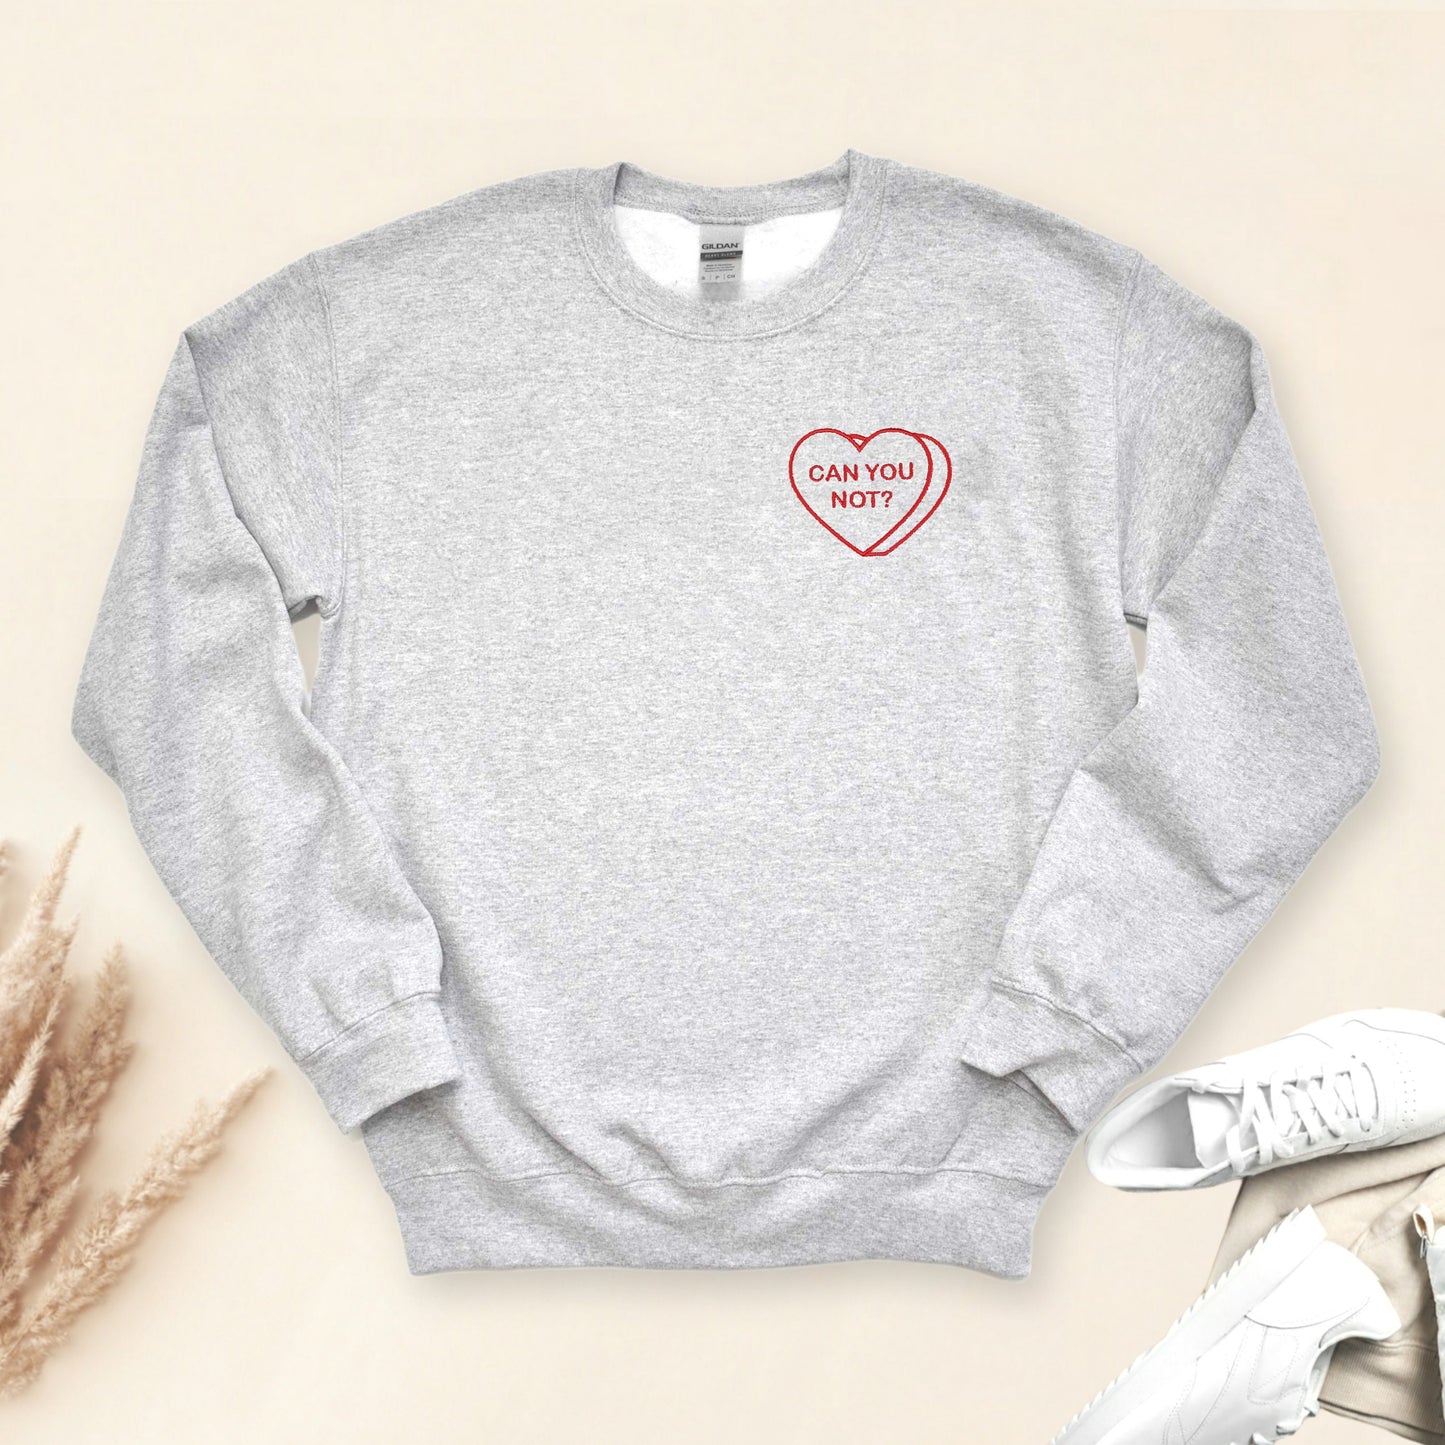 Can You Not? Embroidered Unisex Crewneck Sweatshirt